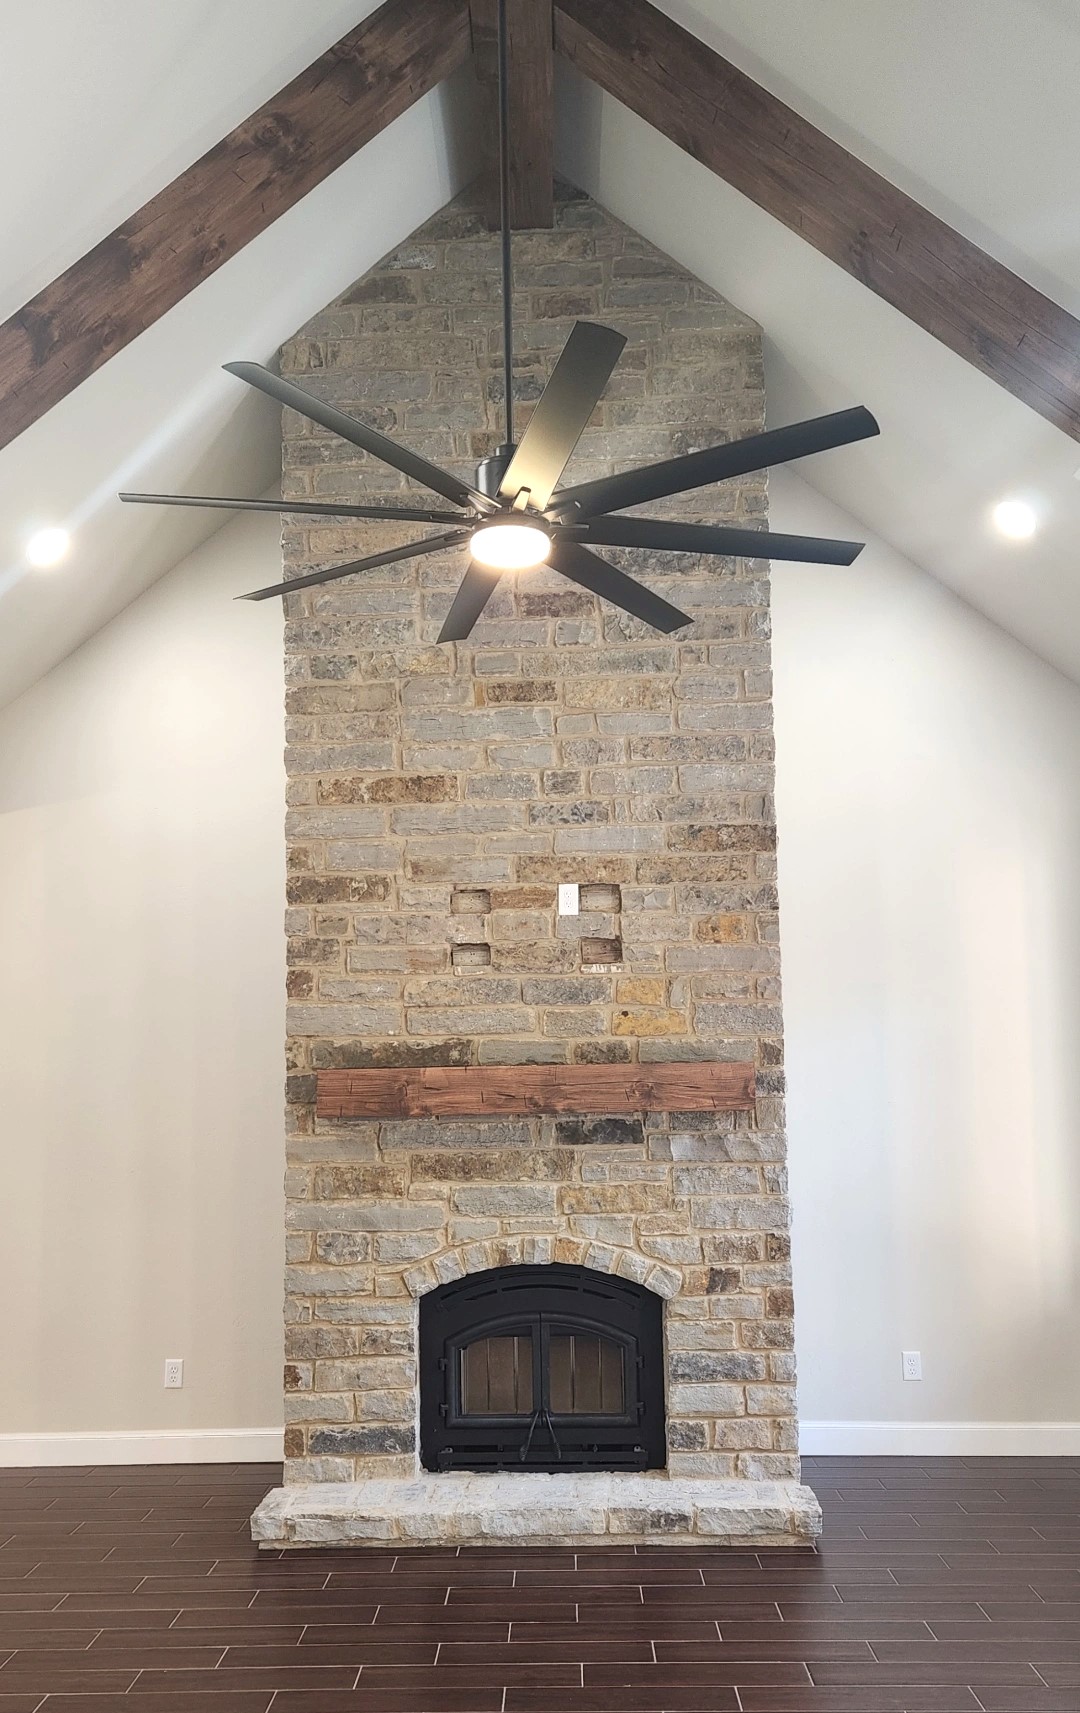 fireplace, rustic fireplace, living room, living room fireplace, vaulted ceiling, beams, living room design, fireplace design, rustic design, interior fireplace